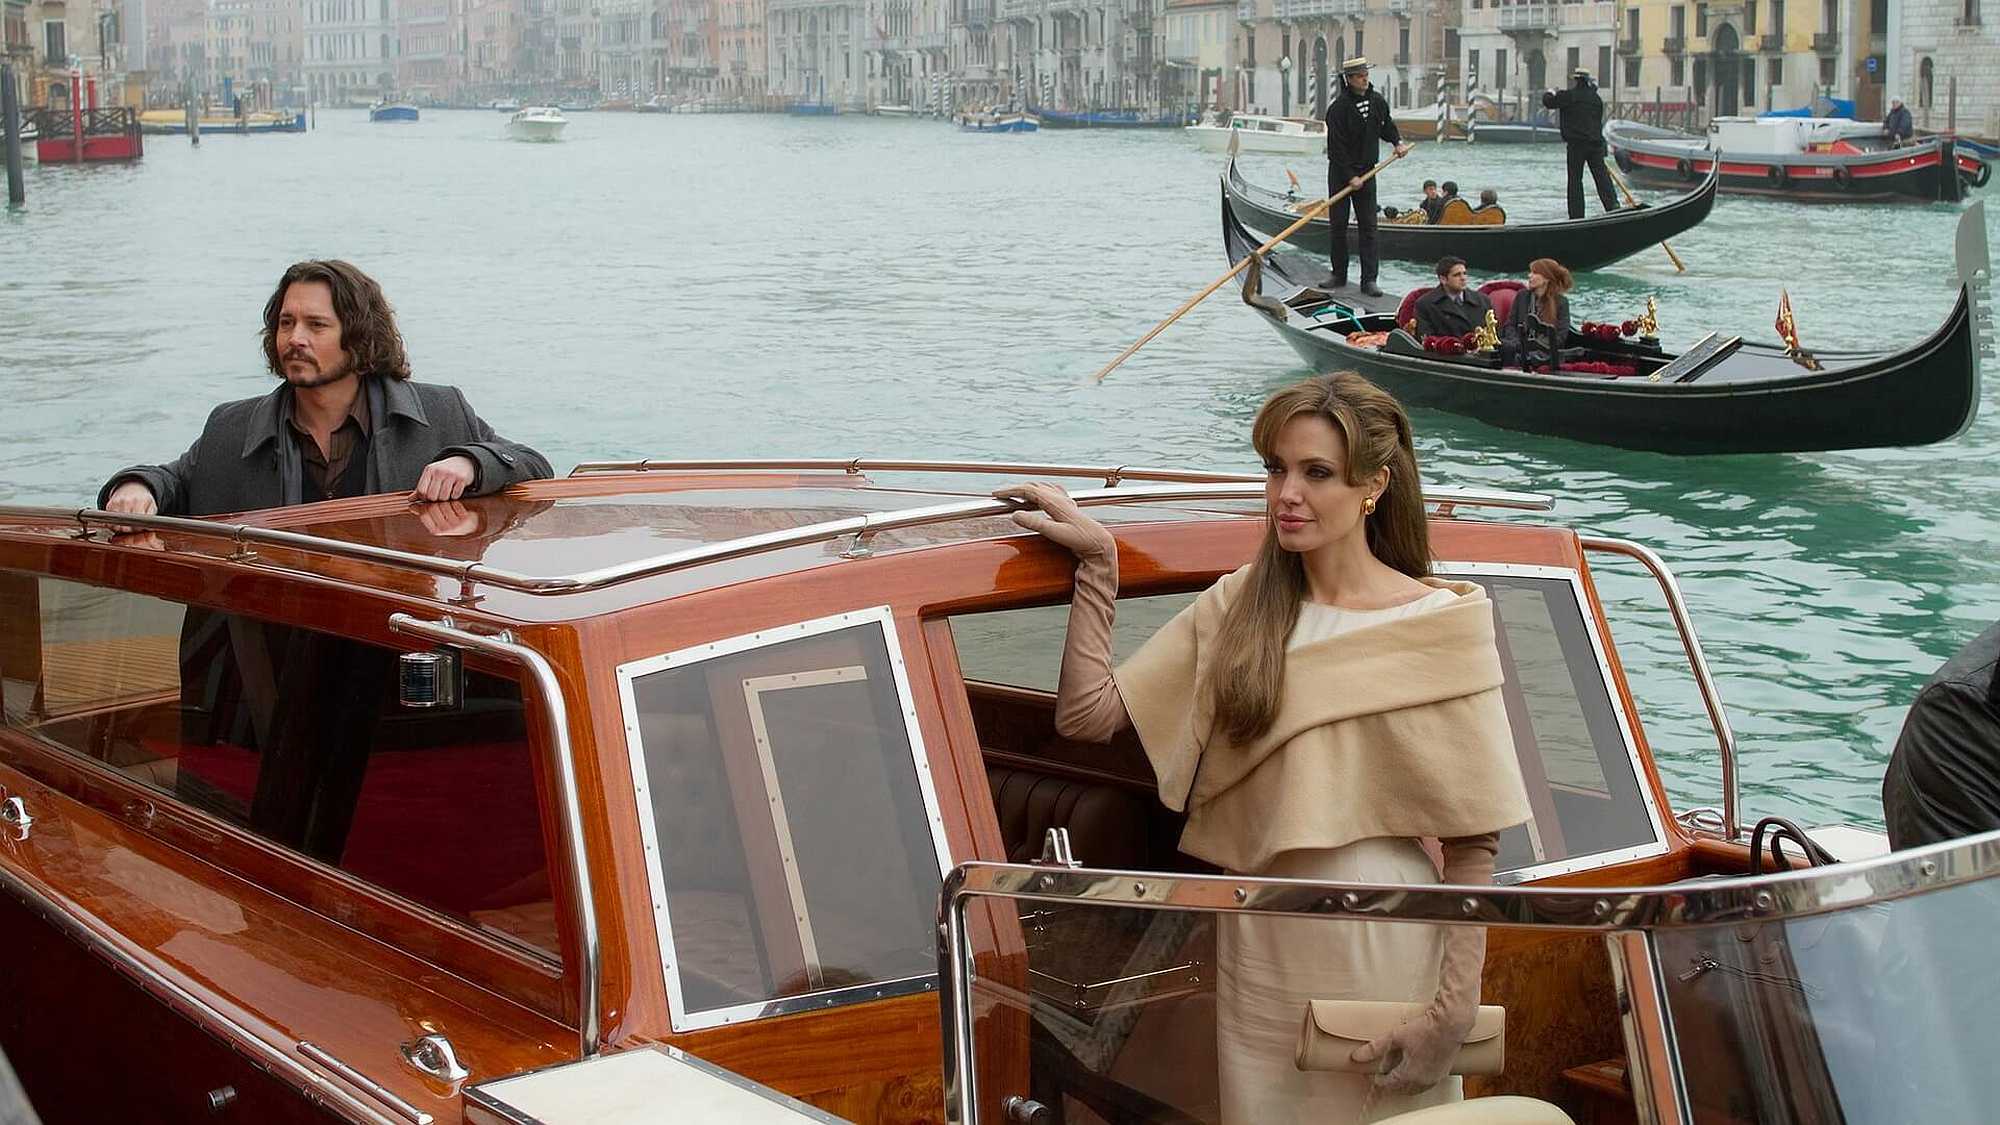 Angelina Jolie in a boat in a Venice canal in the movie The Tourist, in Venice